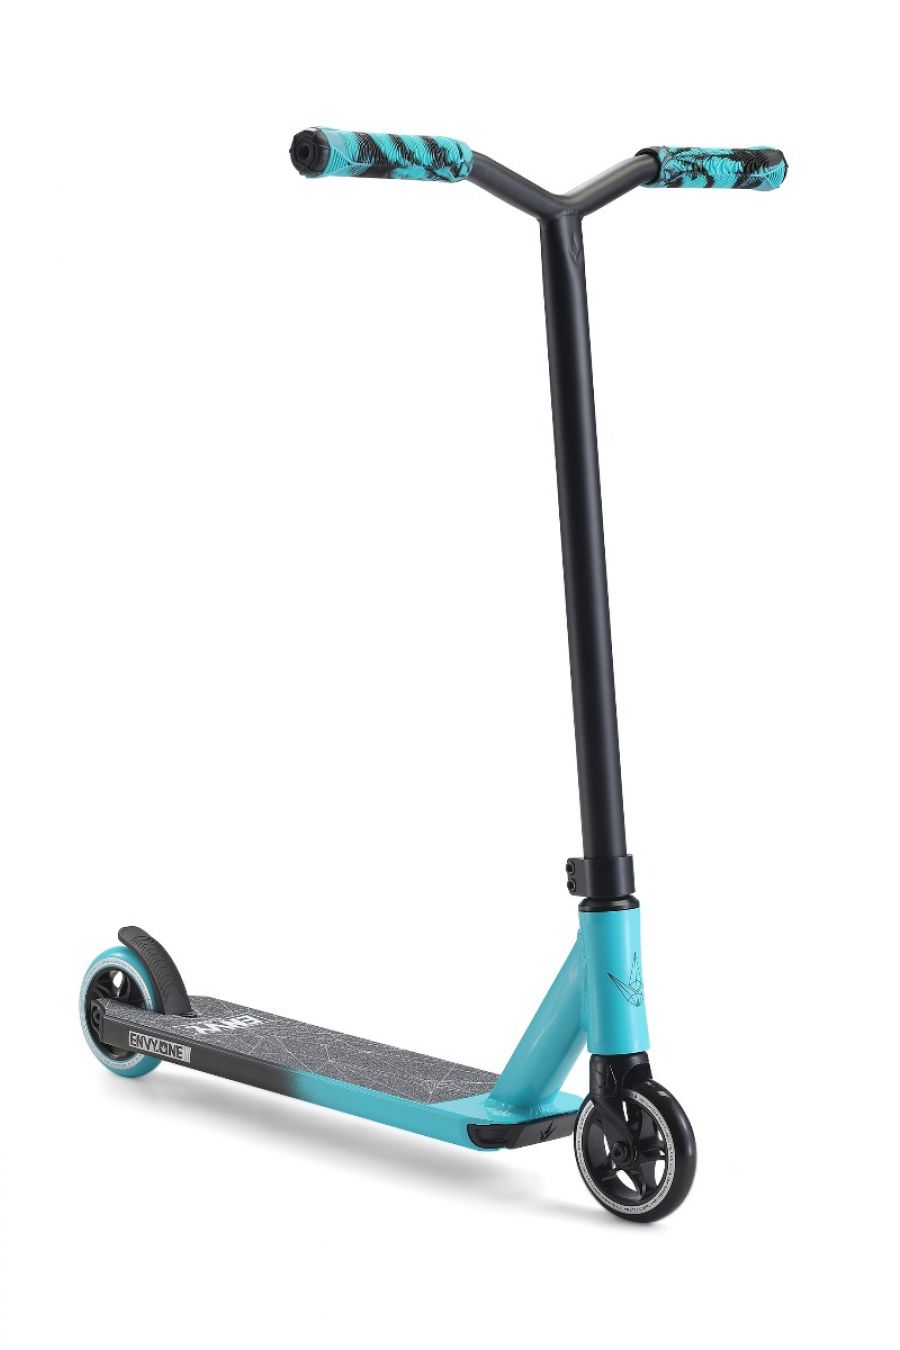 Envy One S3 Complete Scooter (Teal / Black)